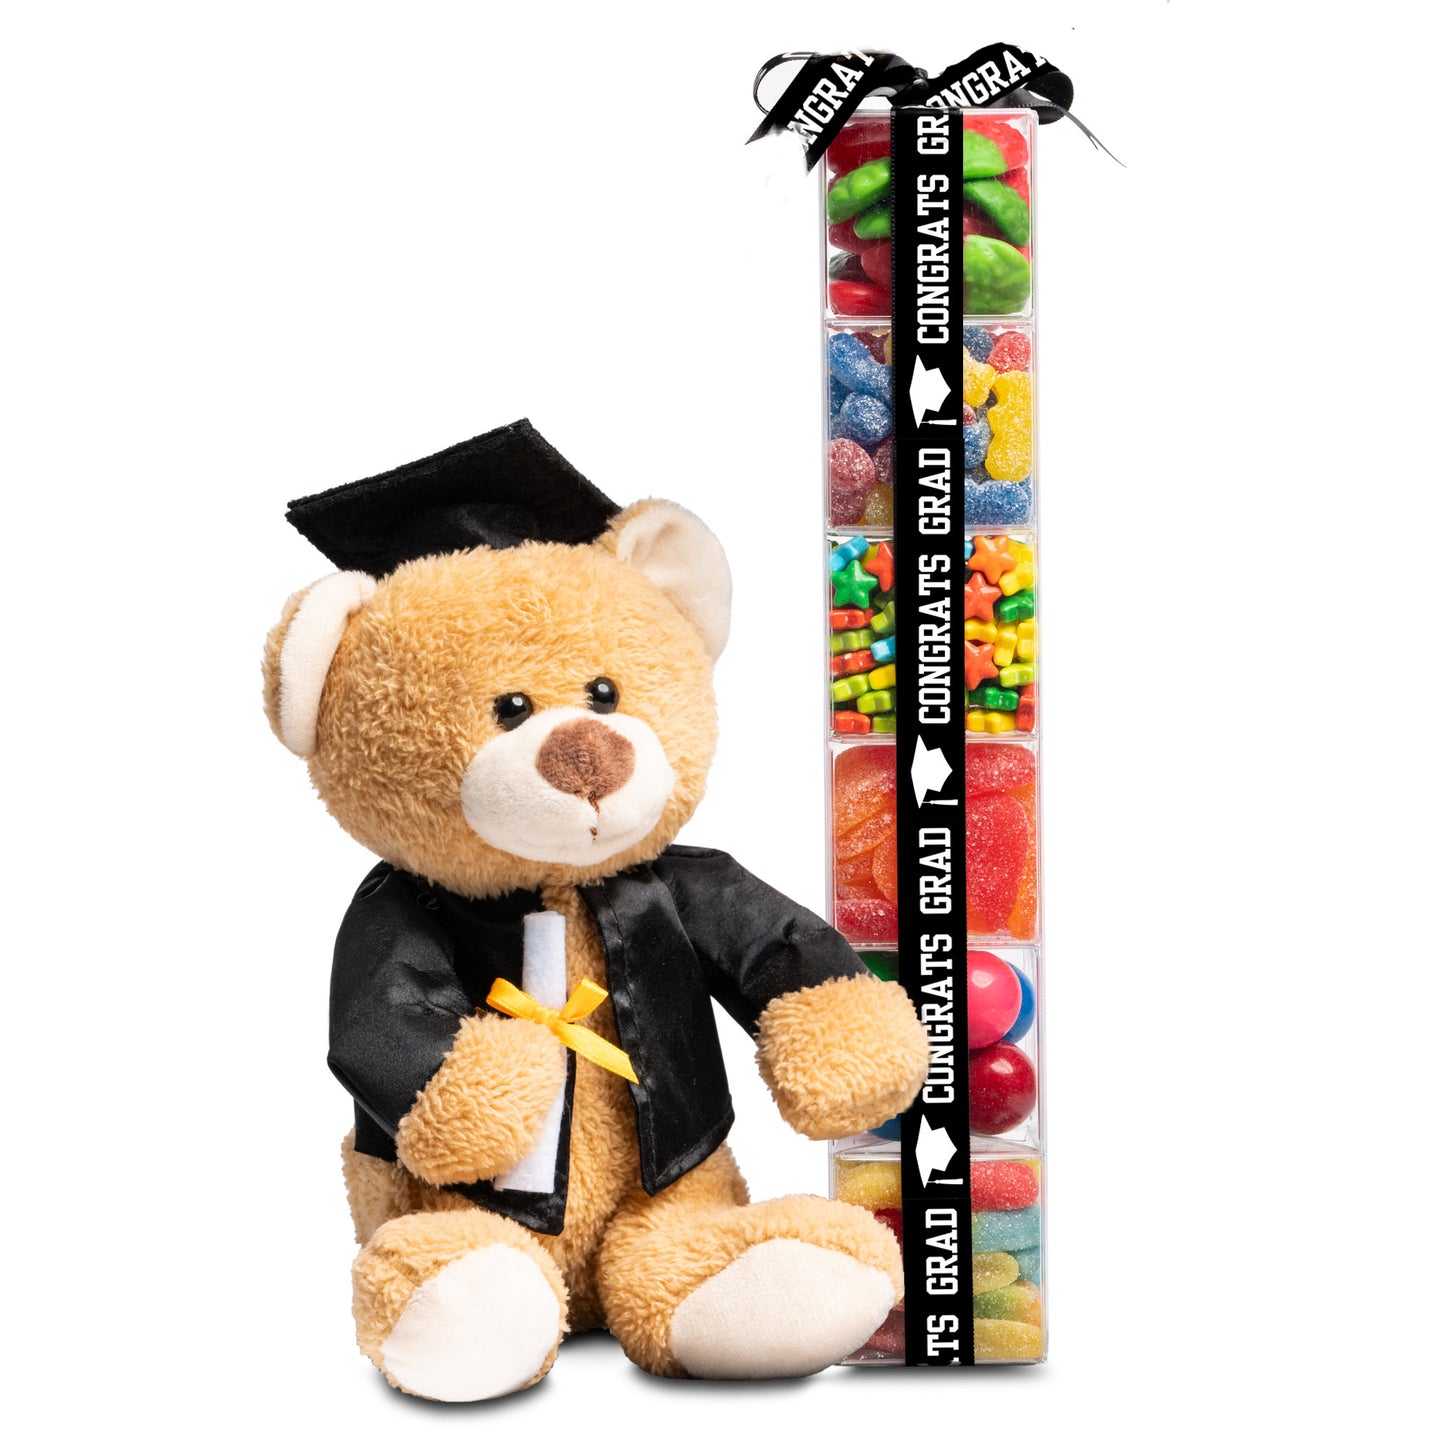 Graduation Stack with Teddy- 6 cubes